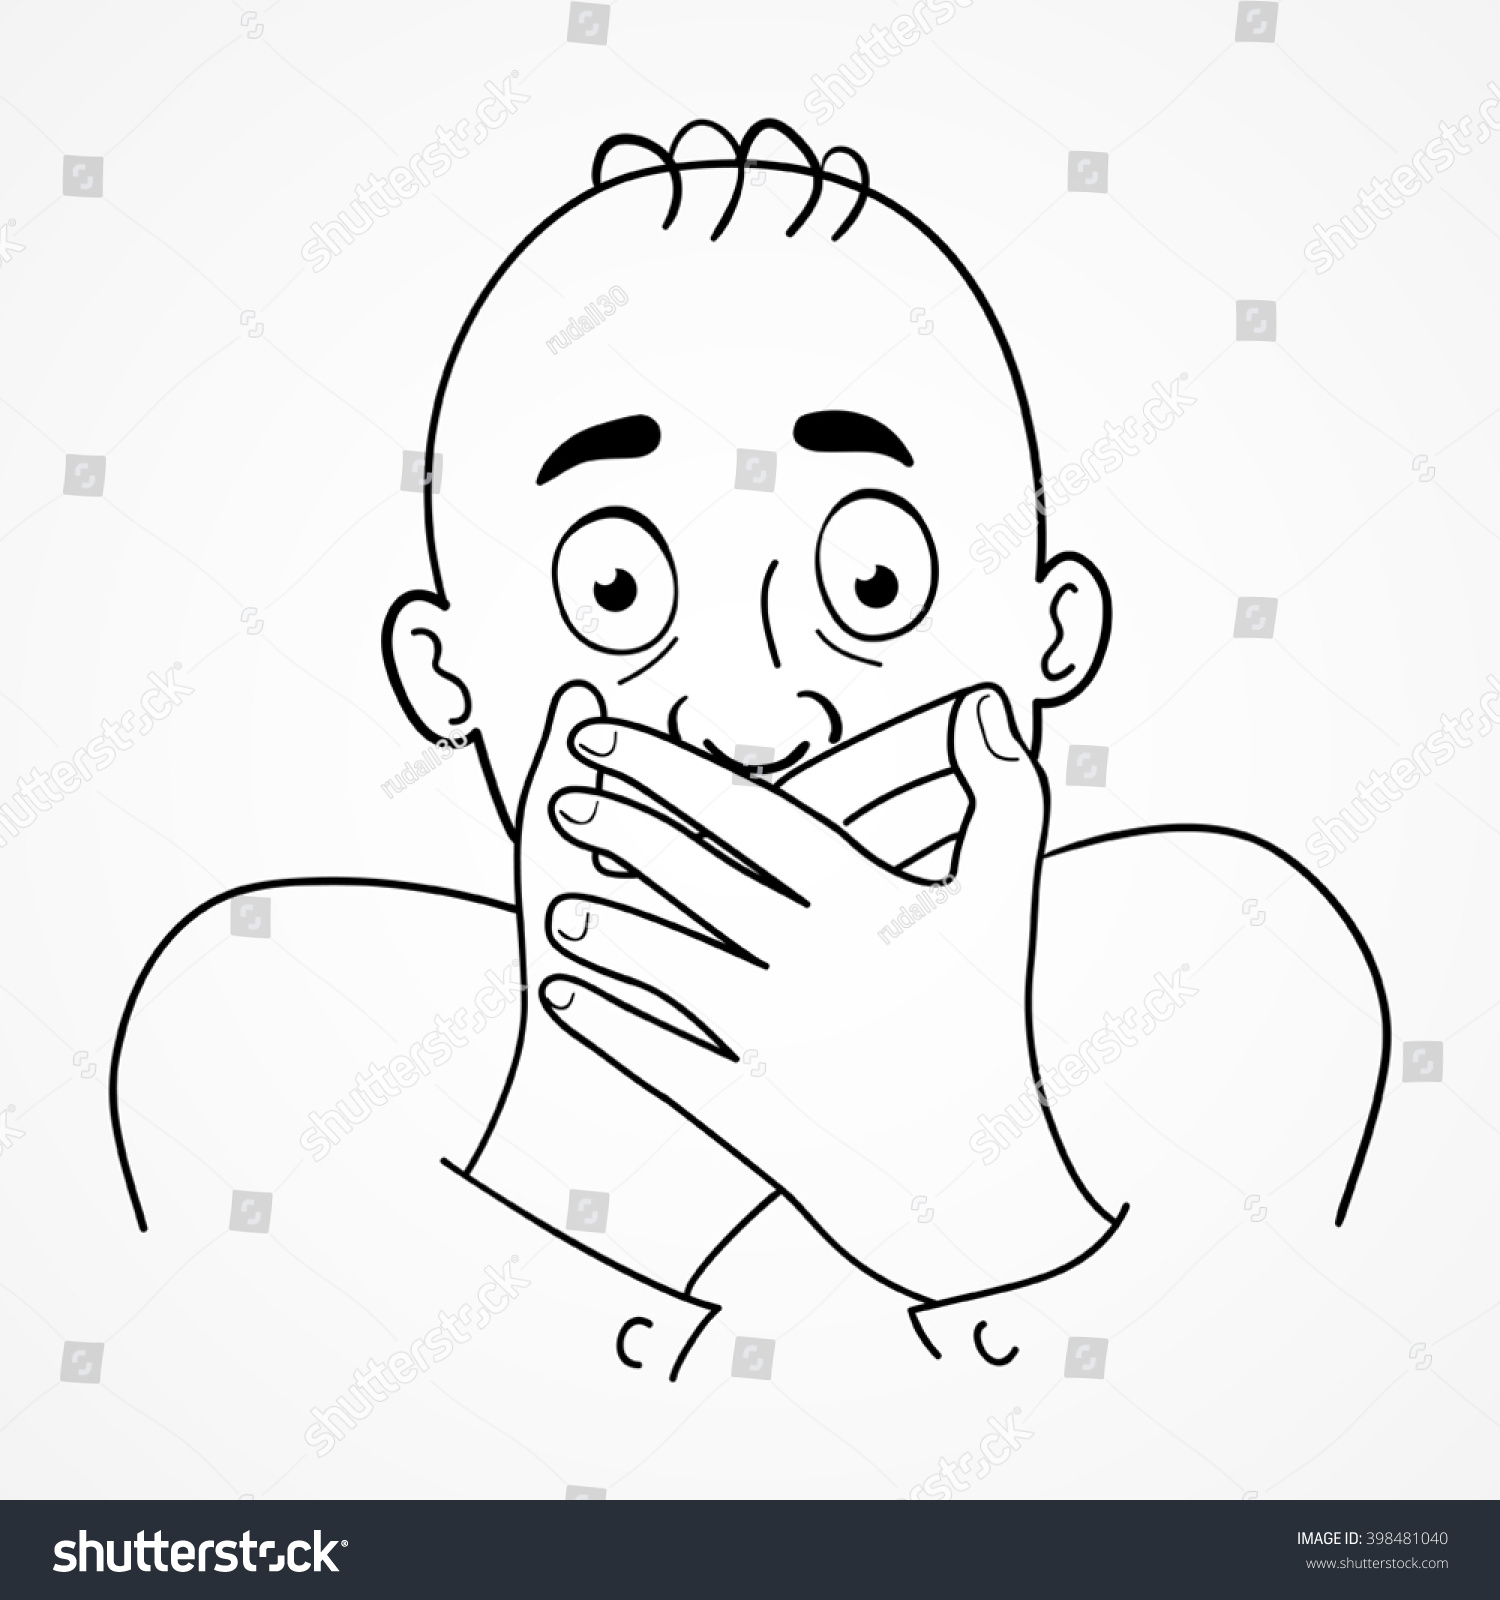 stock-vector-cartoon-illustration-of-a-man-with-surprised-or-embarrassed-face-398481040.jpg